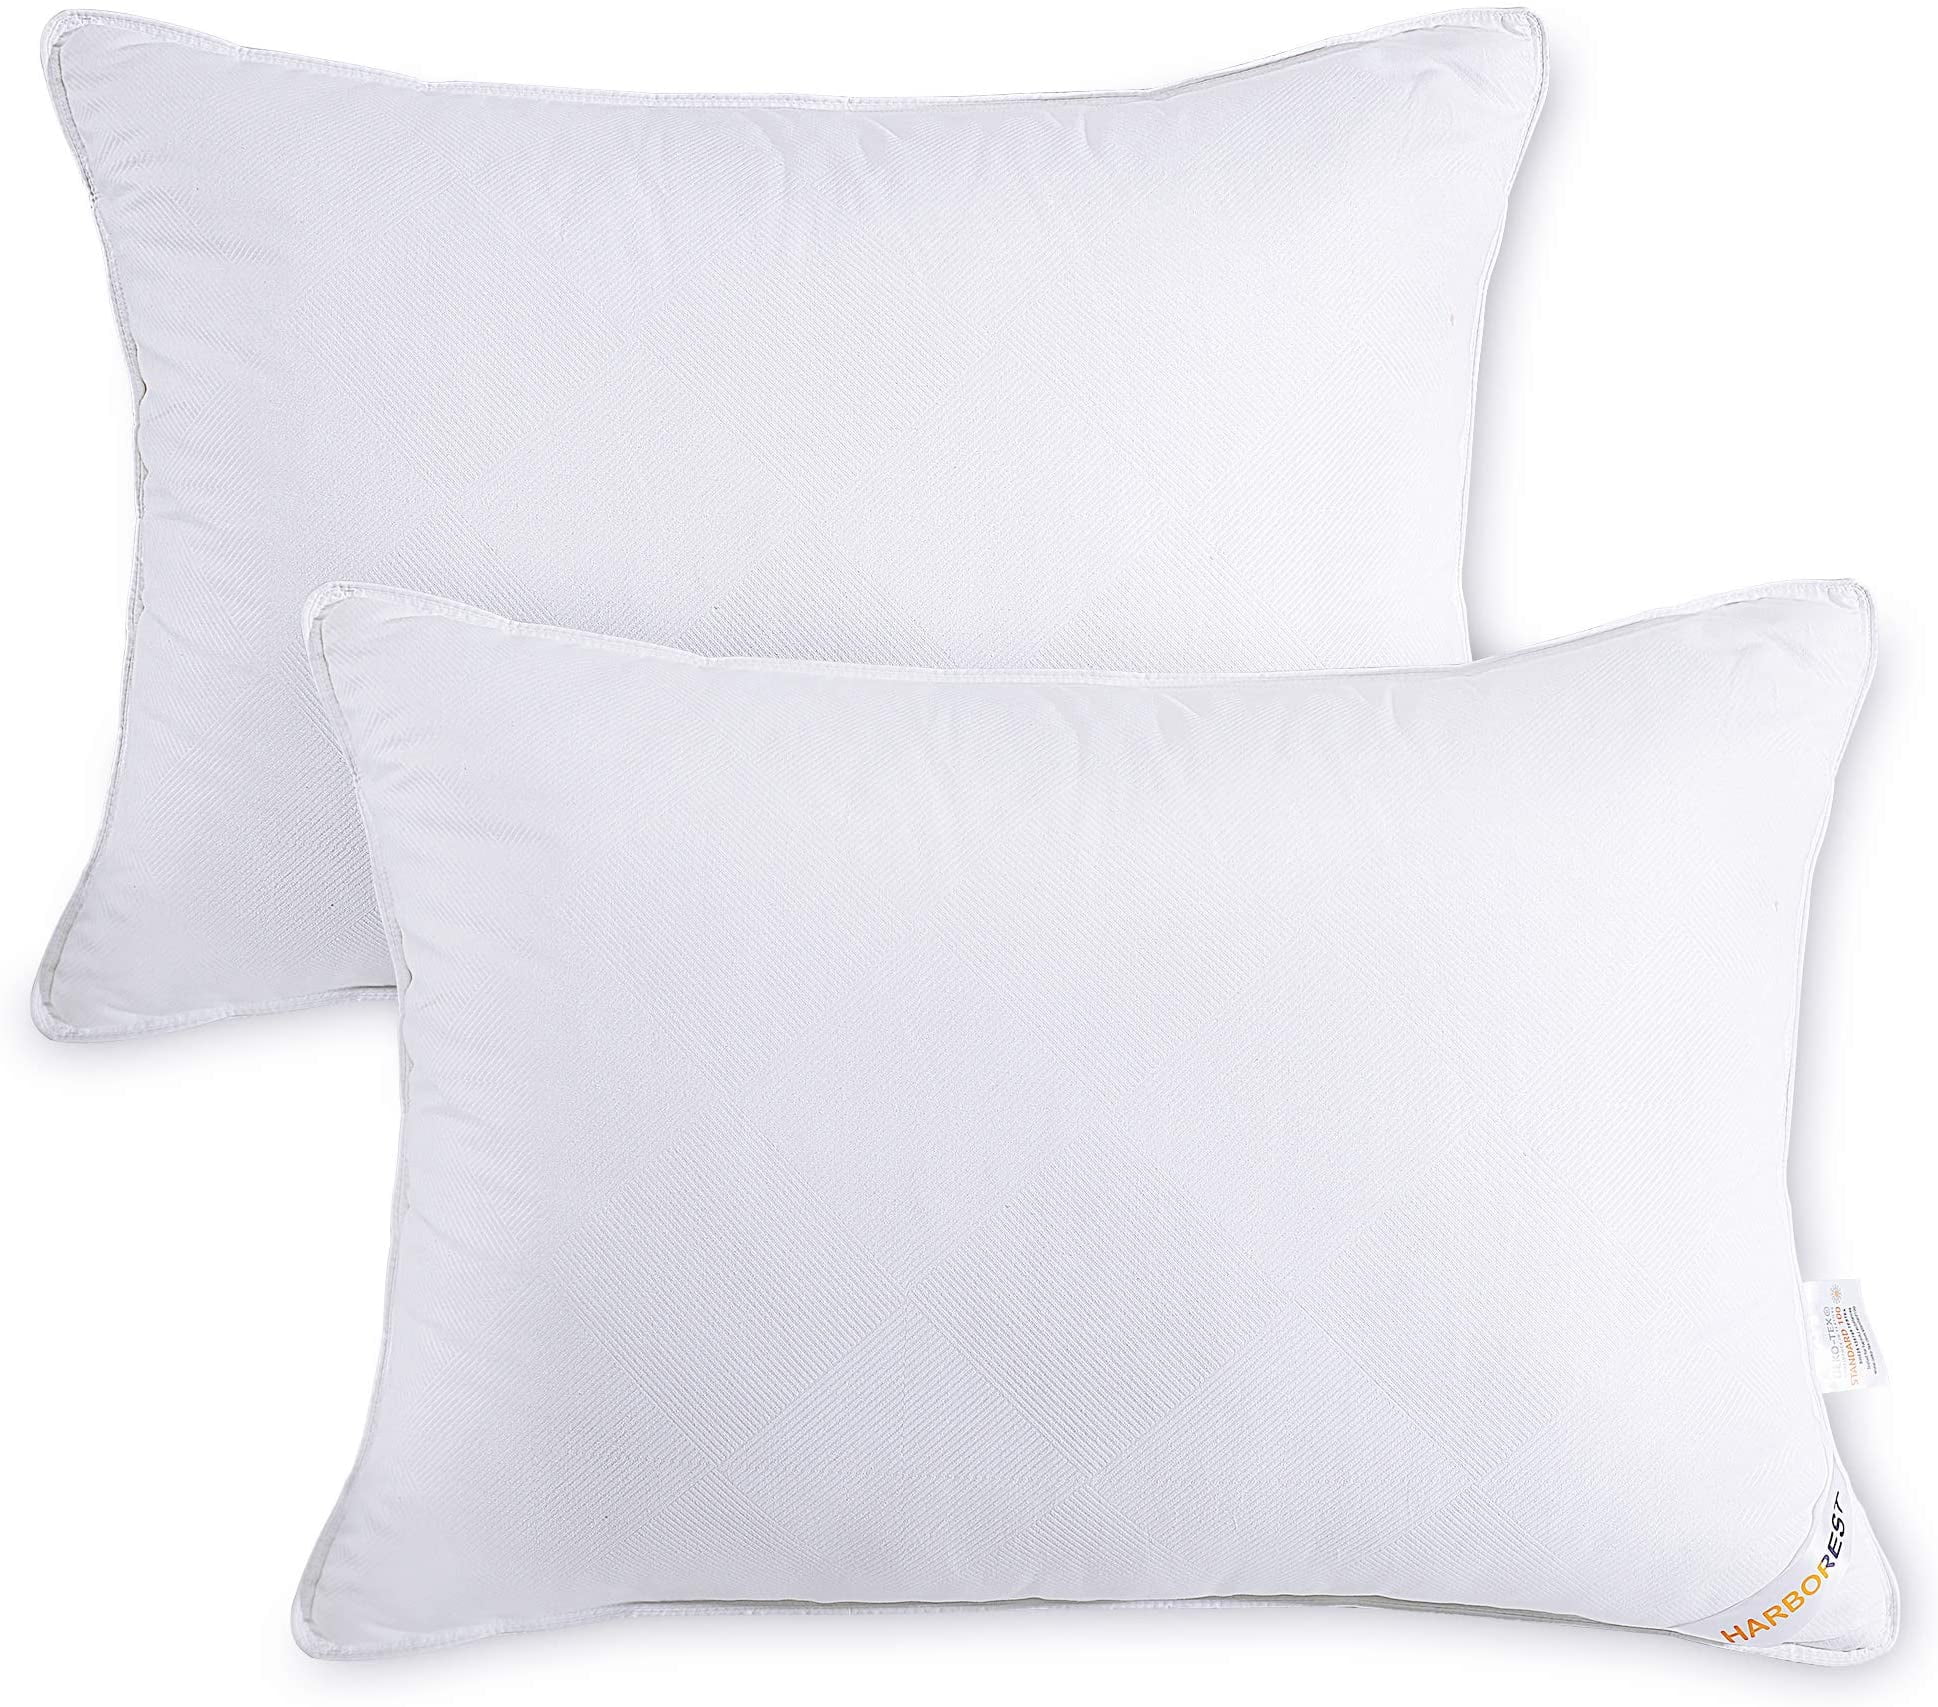 Set of 2 Queen/Standard Bed Pillows for Sleeping Luxury Plush Down Alternative 